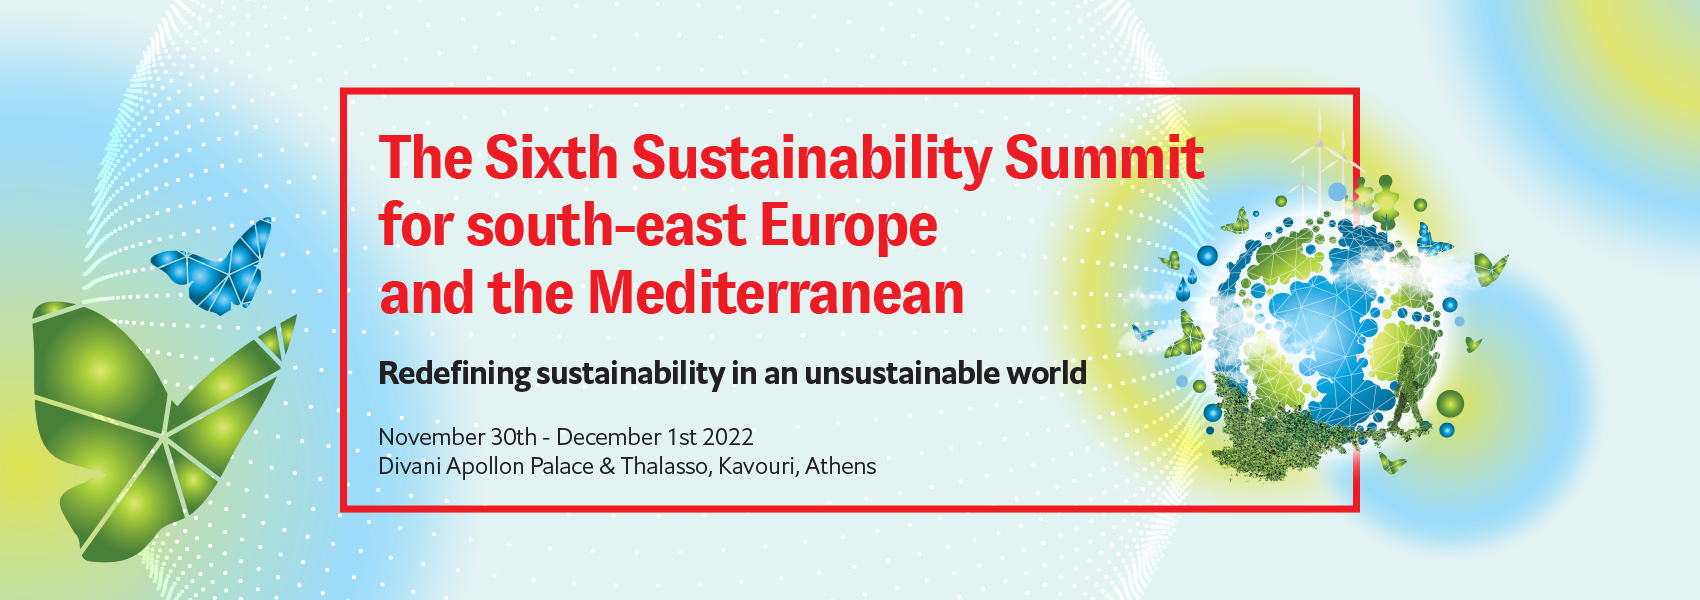 The 6th Sustainability Summit for south-east Europe and the Mediterranean Redefining sustainability in an unsustainable world